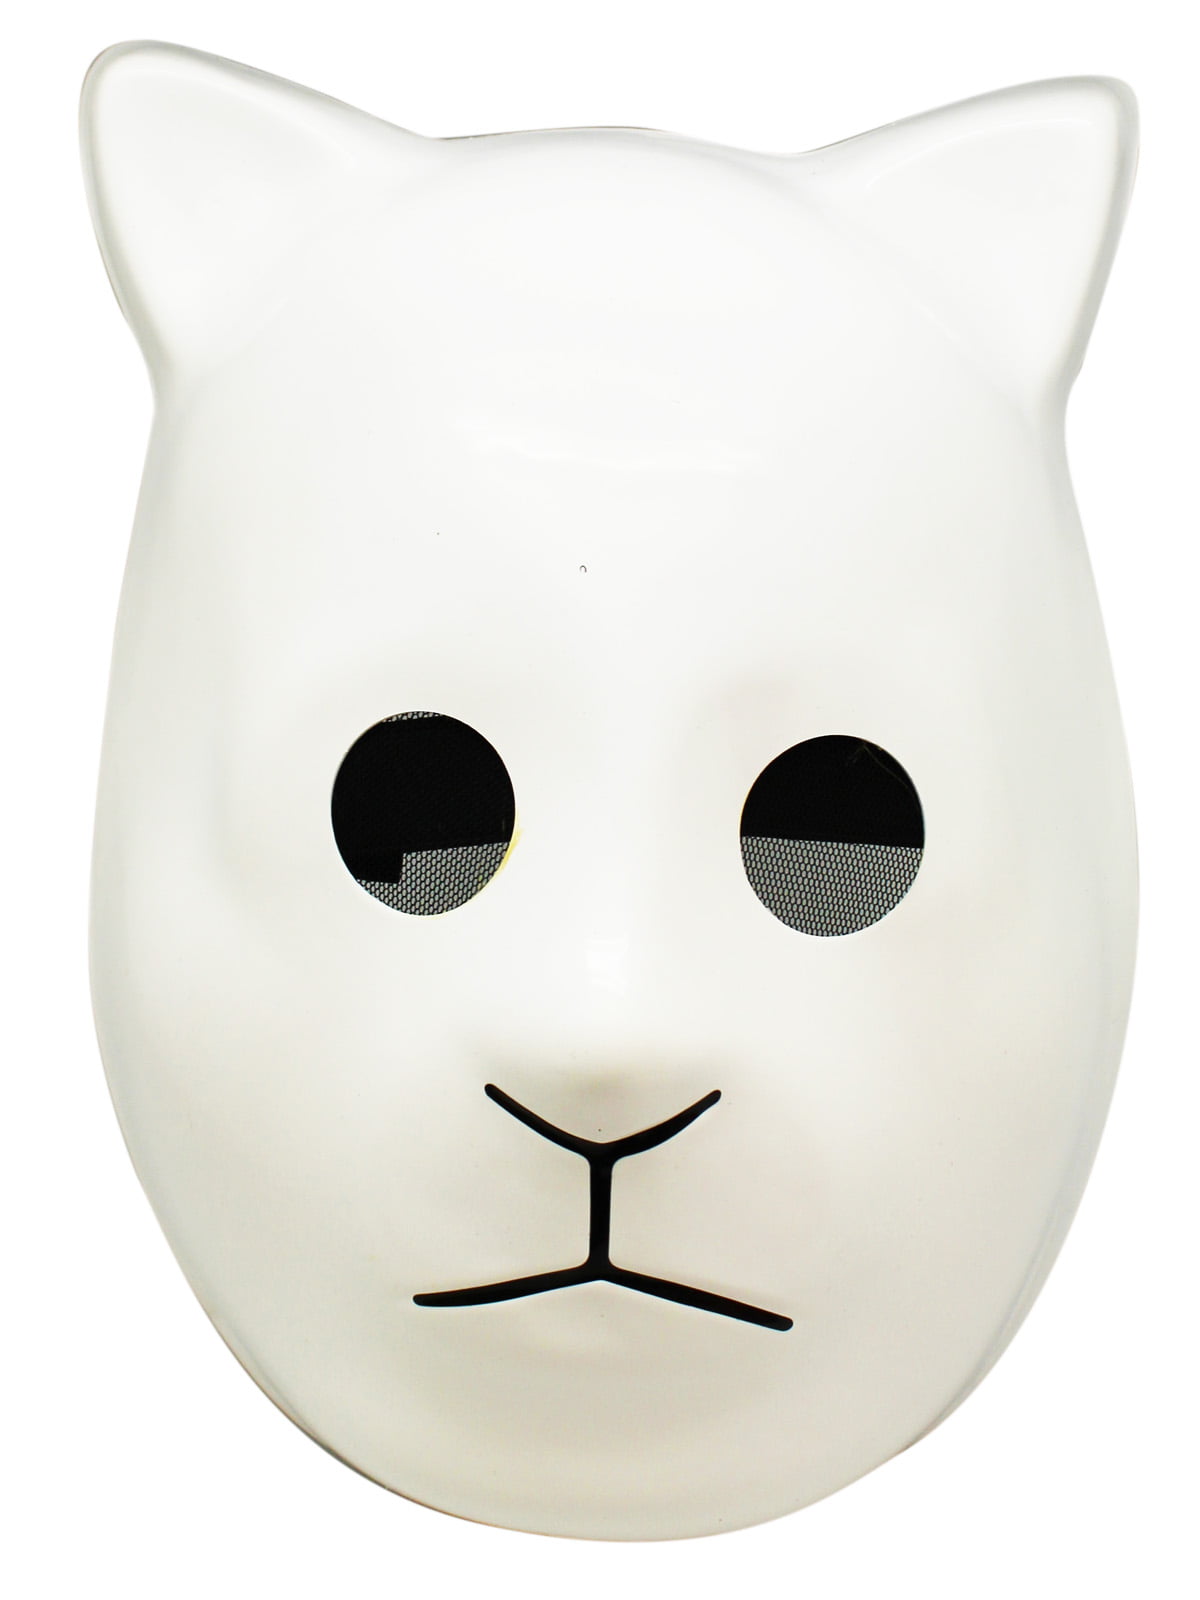 Fancy Dress Cat Face Mask with Whiskers Black/White New by Smiffys 